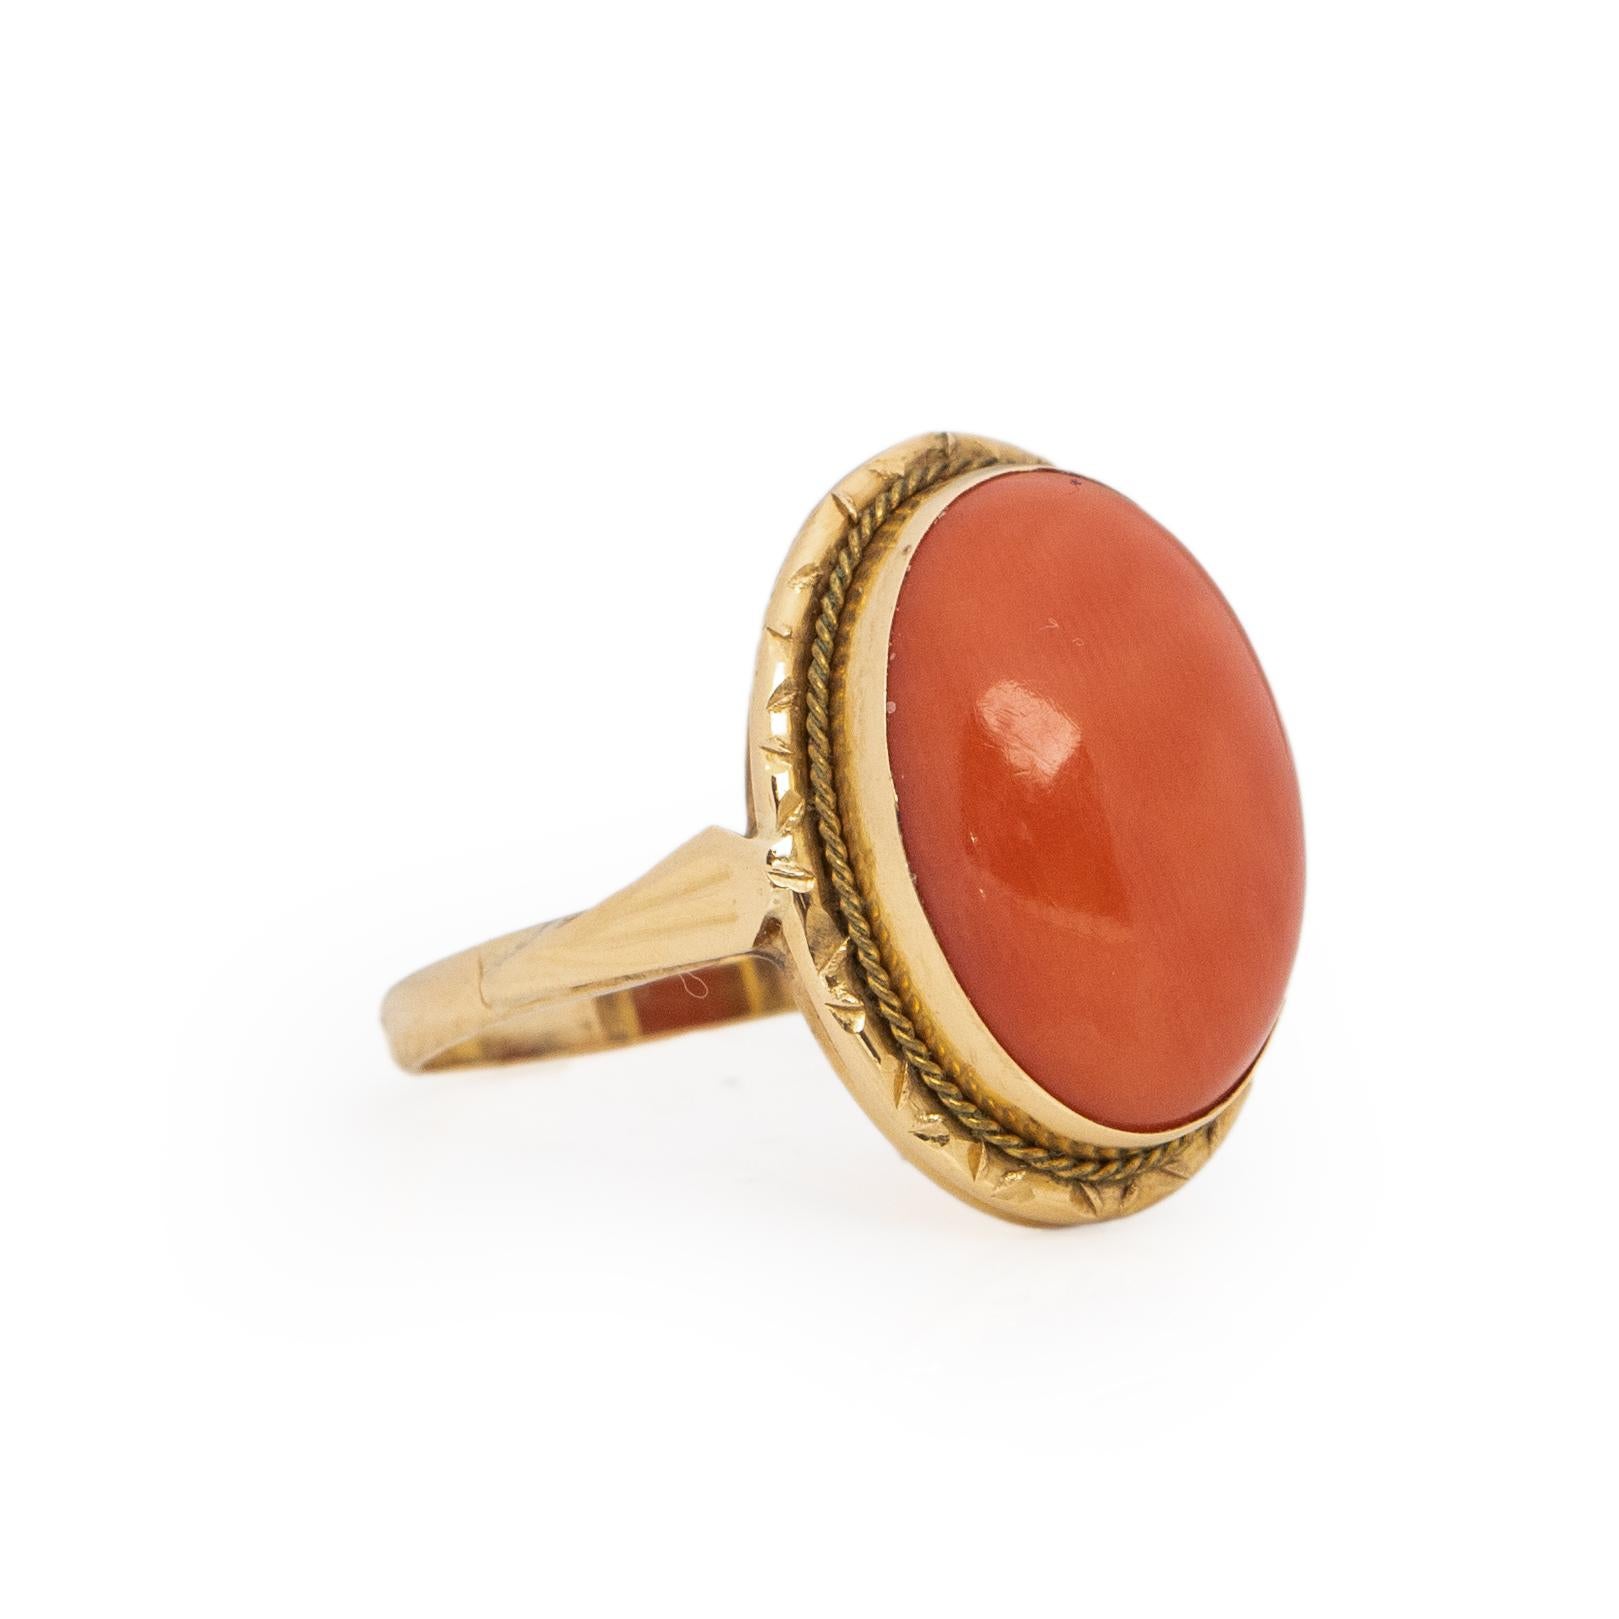 Here we have a beautiful coral cabochon ring. crafted in 14K yellow gold. The smooth oval cab is a breathtaking orange coral, a great pop of color. The yellow gold us a excellent compliment to the orange hue of the coral. Surrounding the bezel